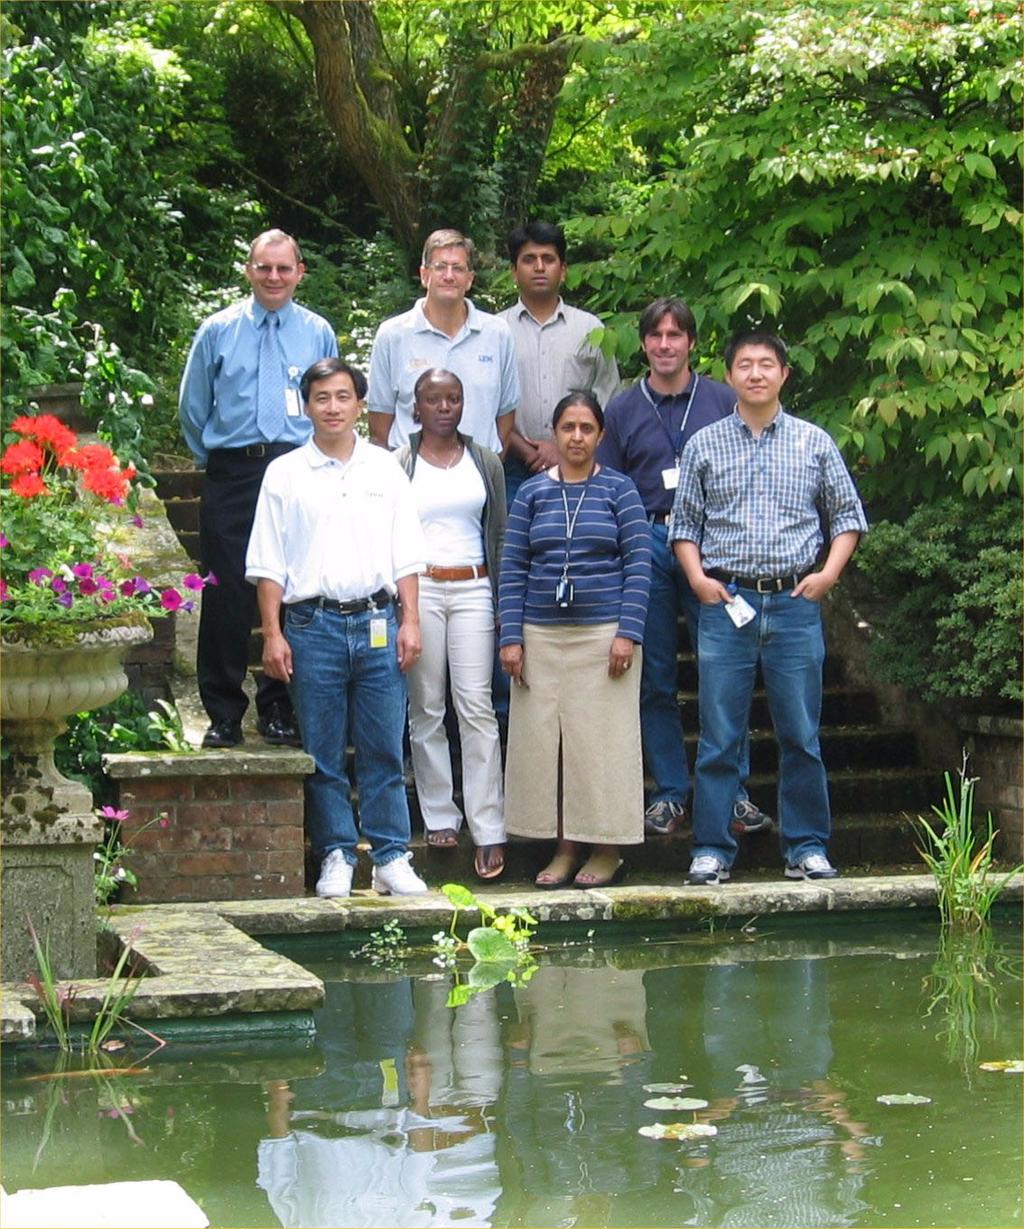 The authors Top row from left: Andrew, Jerry, Sachin, Michael Bottom row from left: Tony, Ope, Saida, Dong Kai Saida Davies is a Project Leader for ITSO Hursley UK.